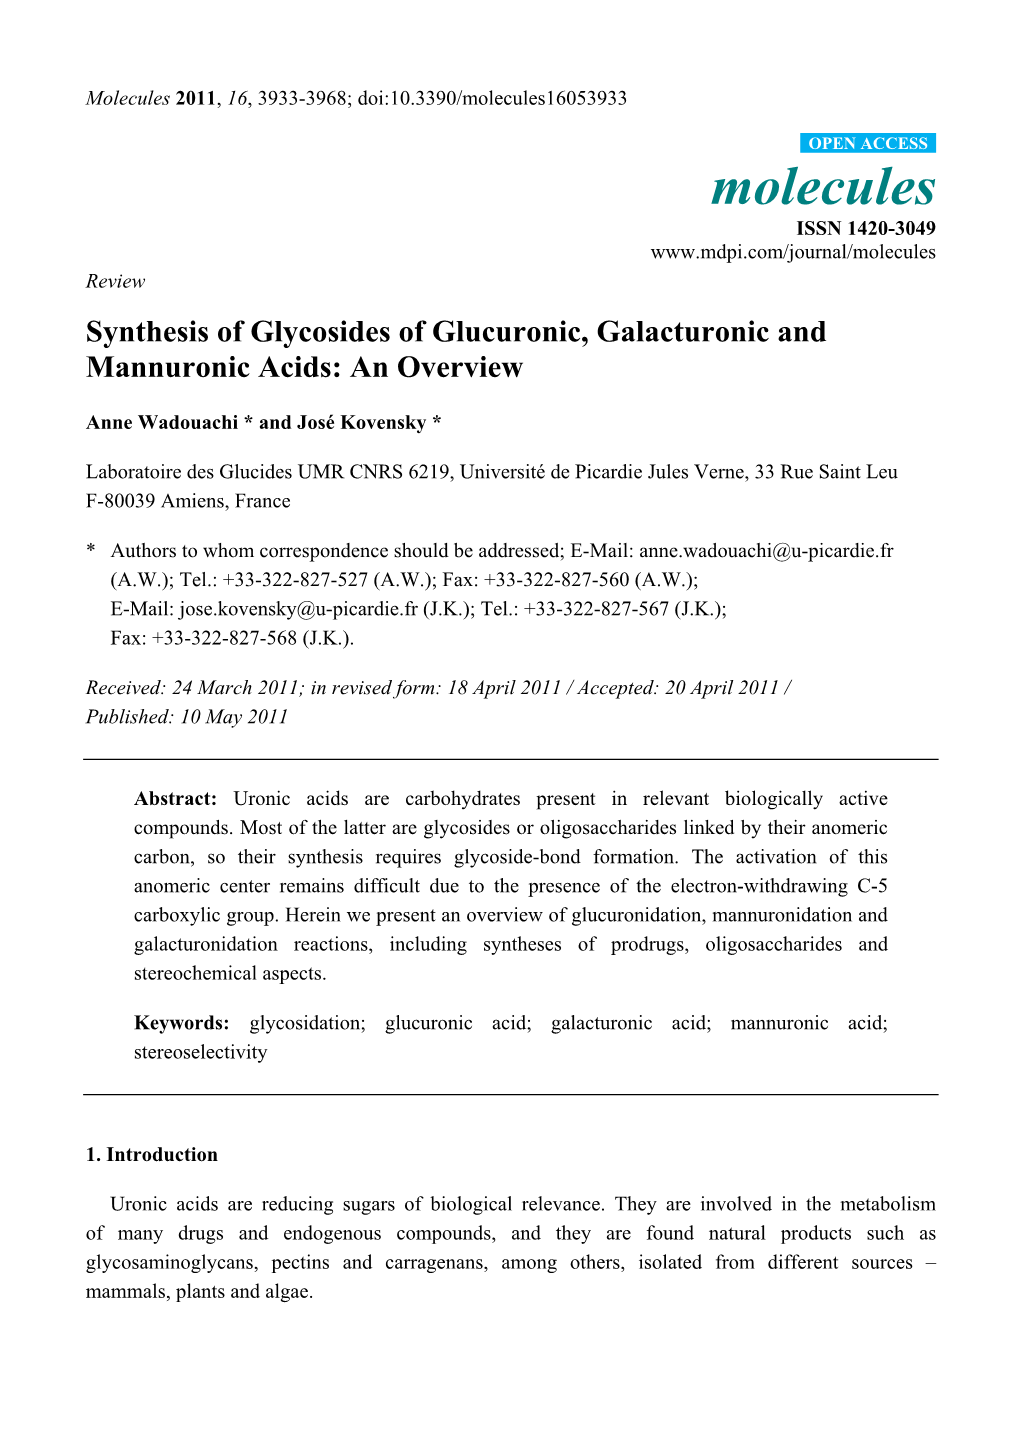 Synthesis of Glycosides of Glucuronic, Galacturonic and Mannuronic Acids: an Overview